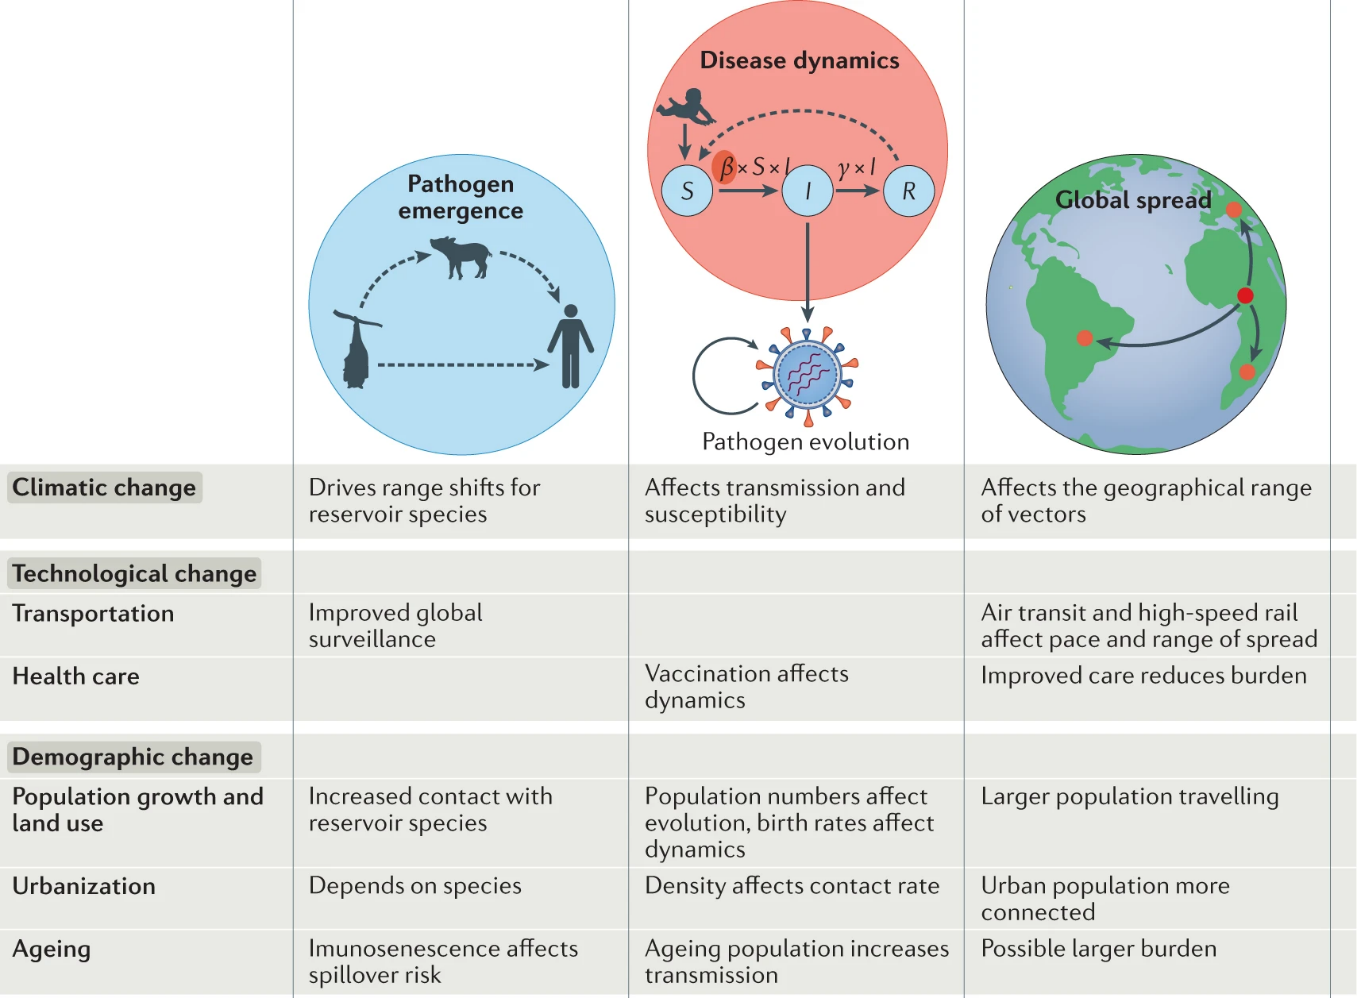 A graphic showing the effects of climatic, technological and demographic change on disease emergence, dynamics and spread.